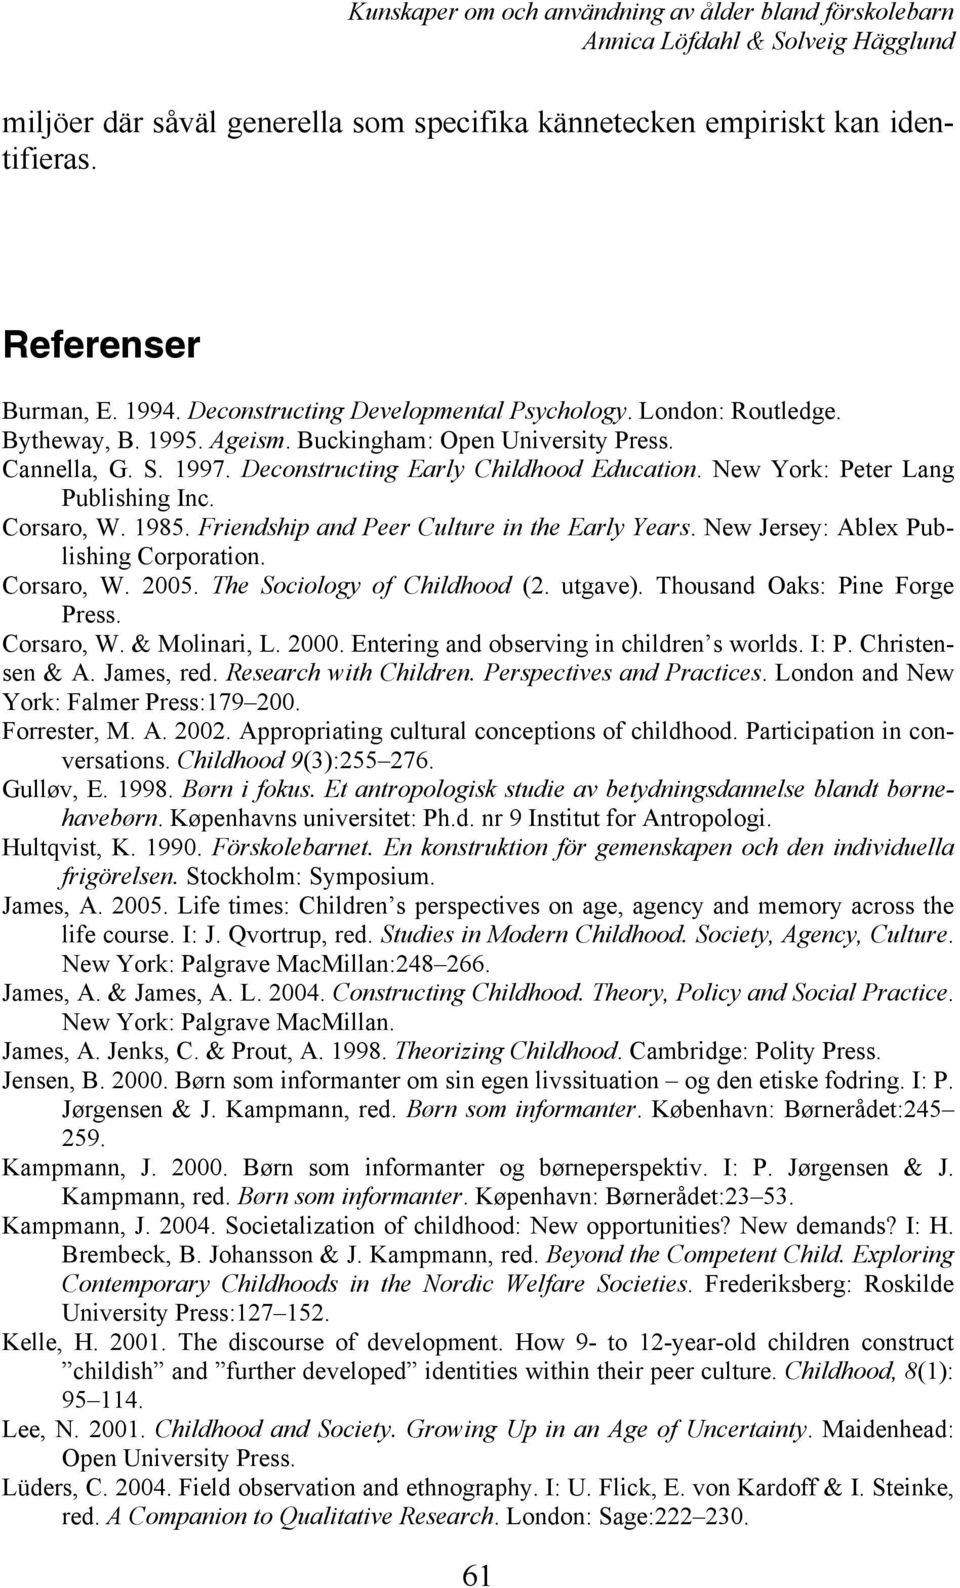 Friendship and Peer Culture in the Early Years. New Jersey: Ablex Publishing Corporation. Corsaro, W. 2005. The Sociology of Childhood (2. utgave). Thousand Oaks: Pine Forge Press. Corsaro, W. & Molinari, L.